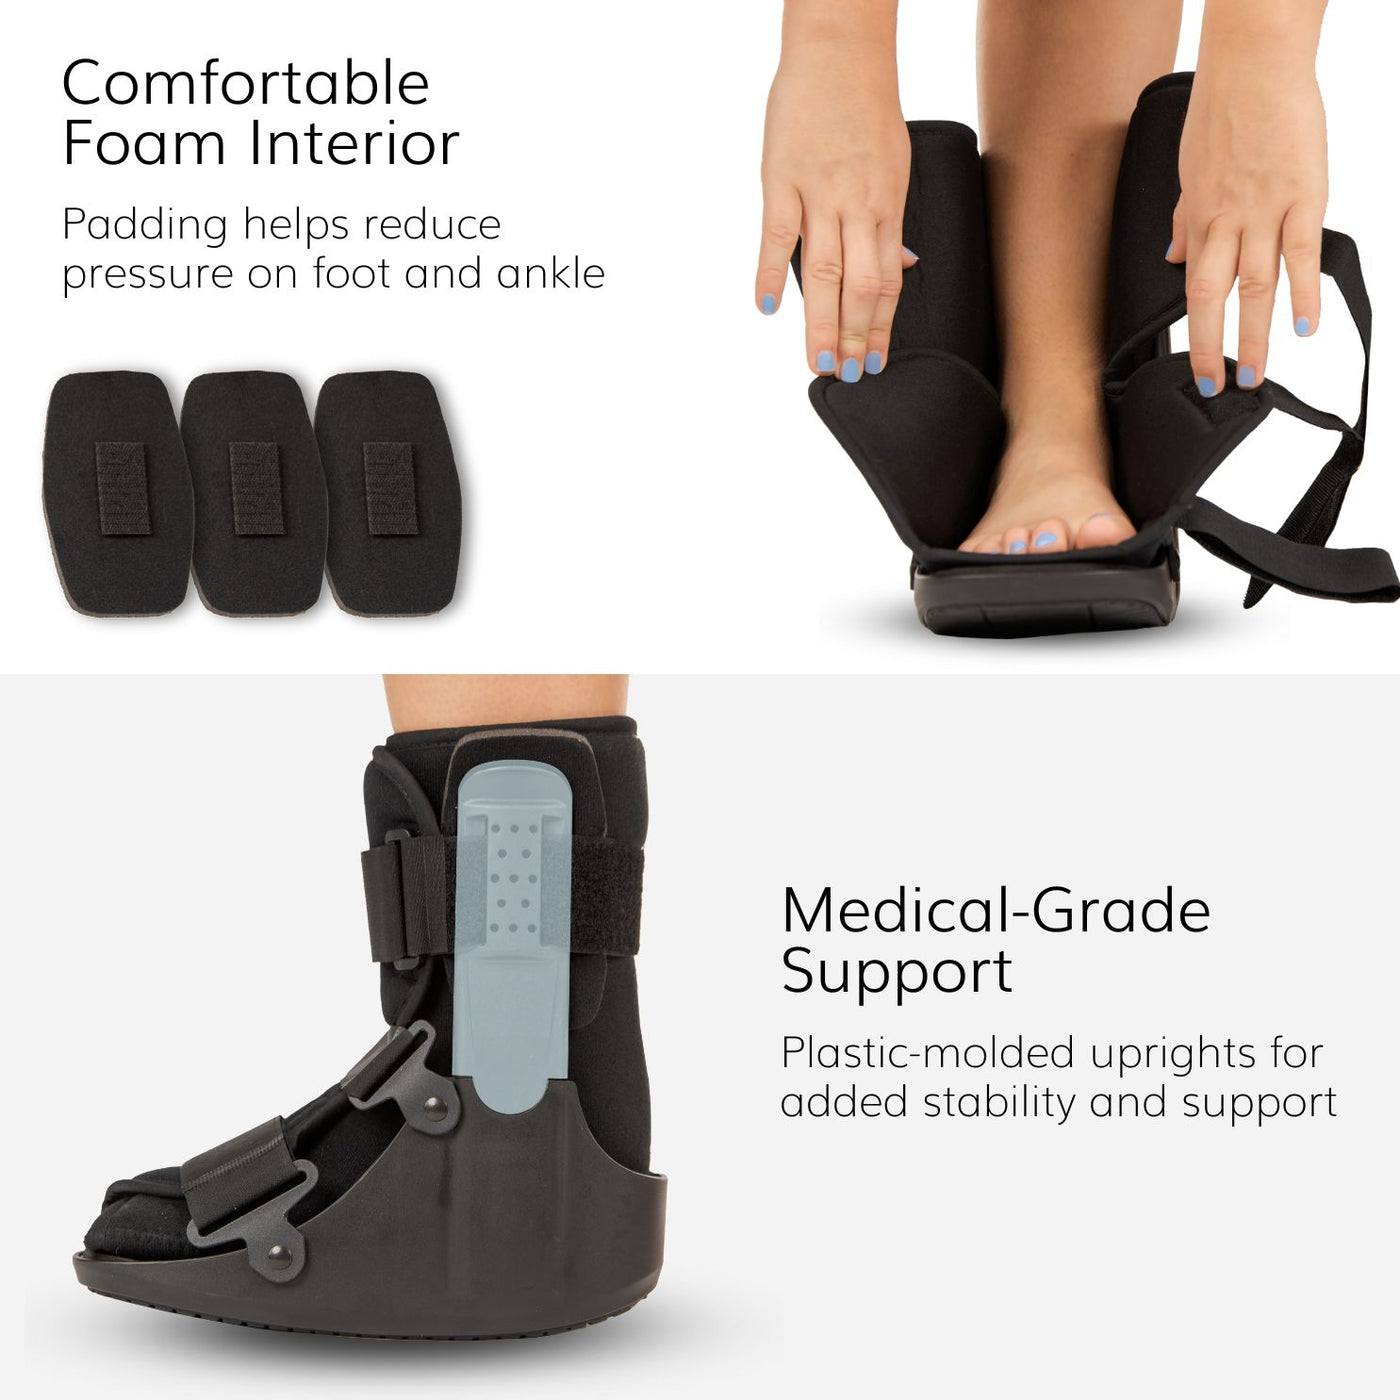 The orthopedic broken toe boot has adjustable straps to give the boot a custom fit